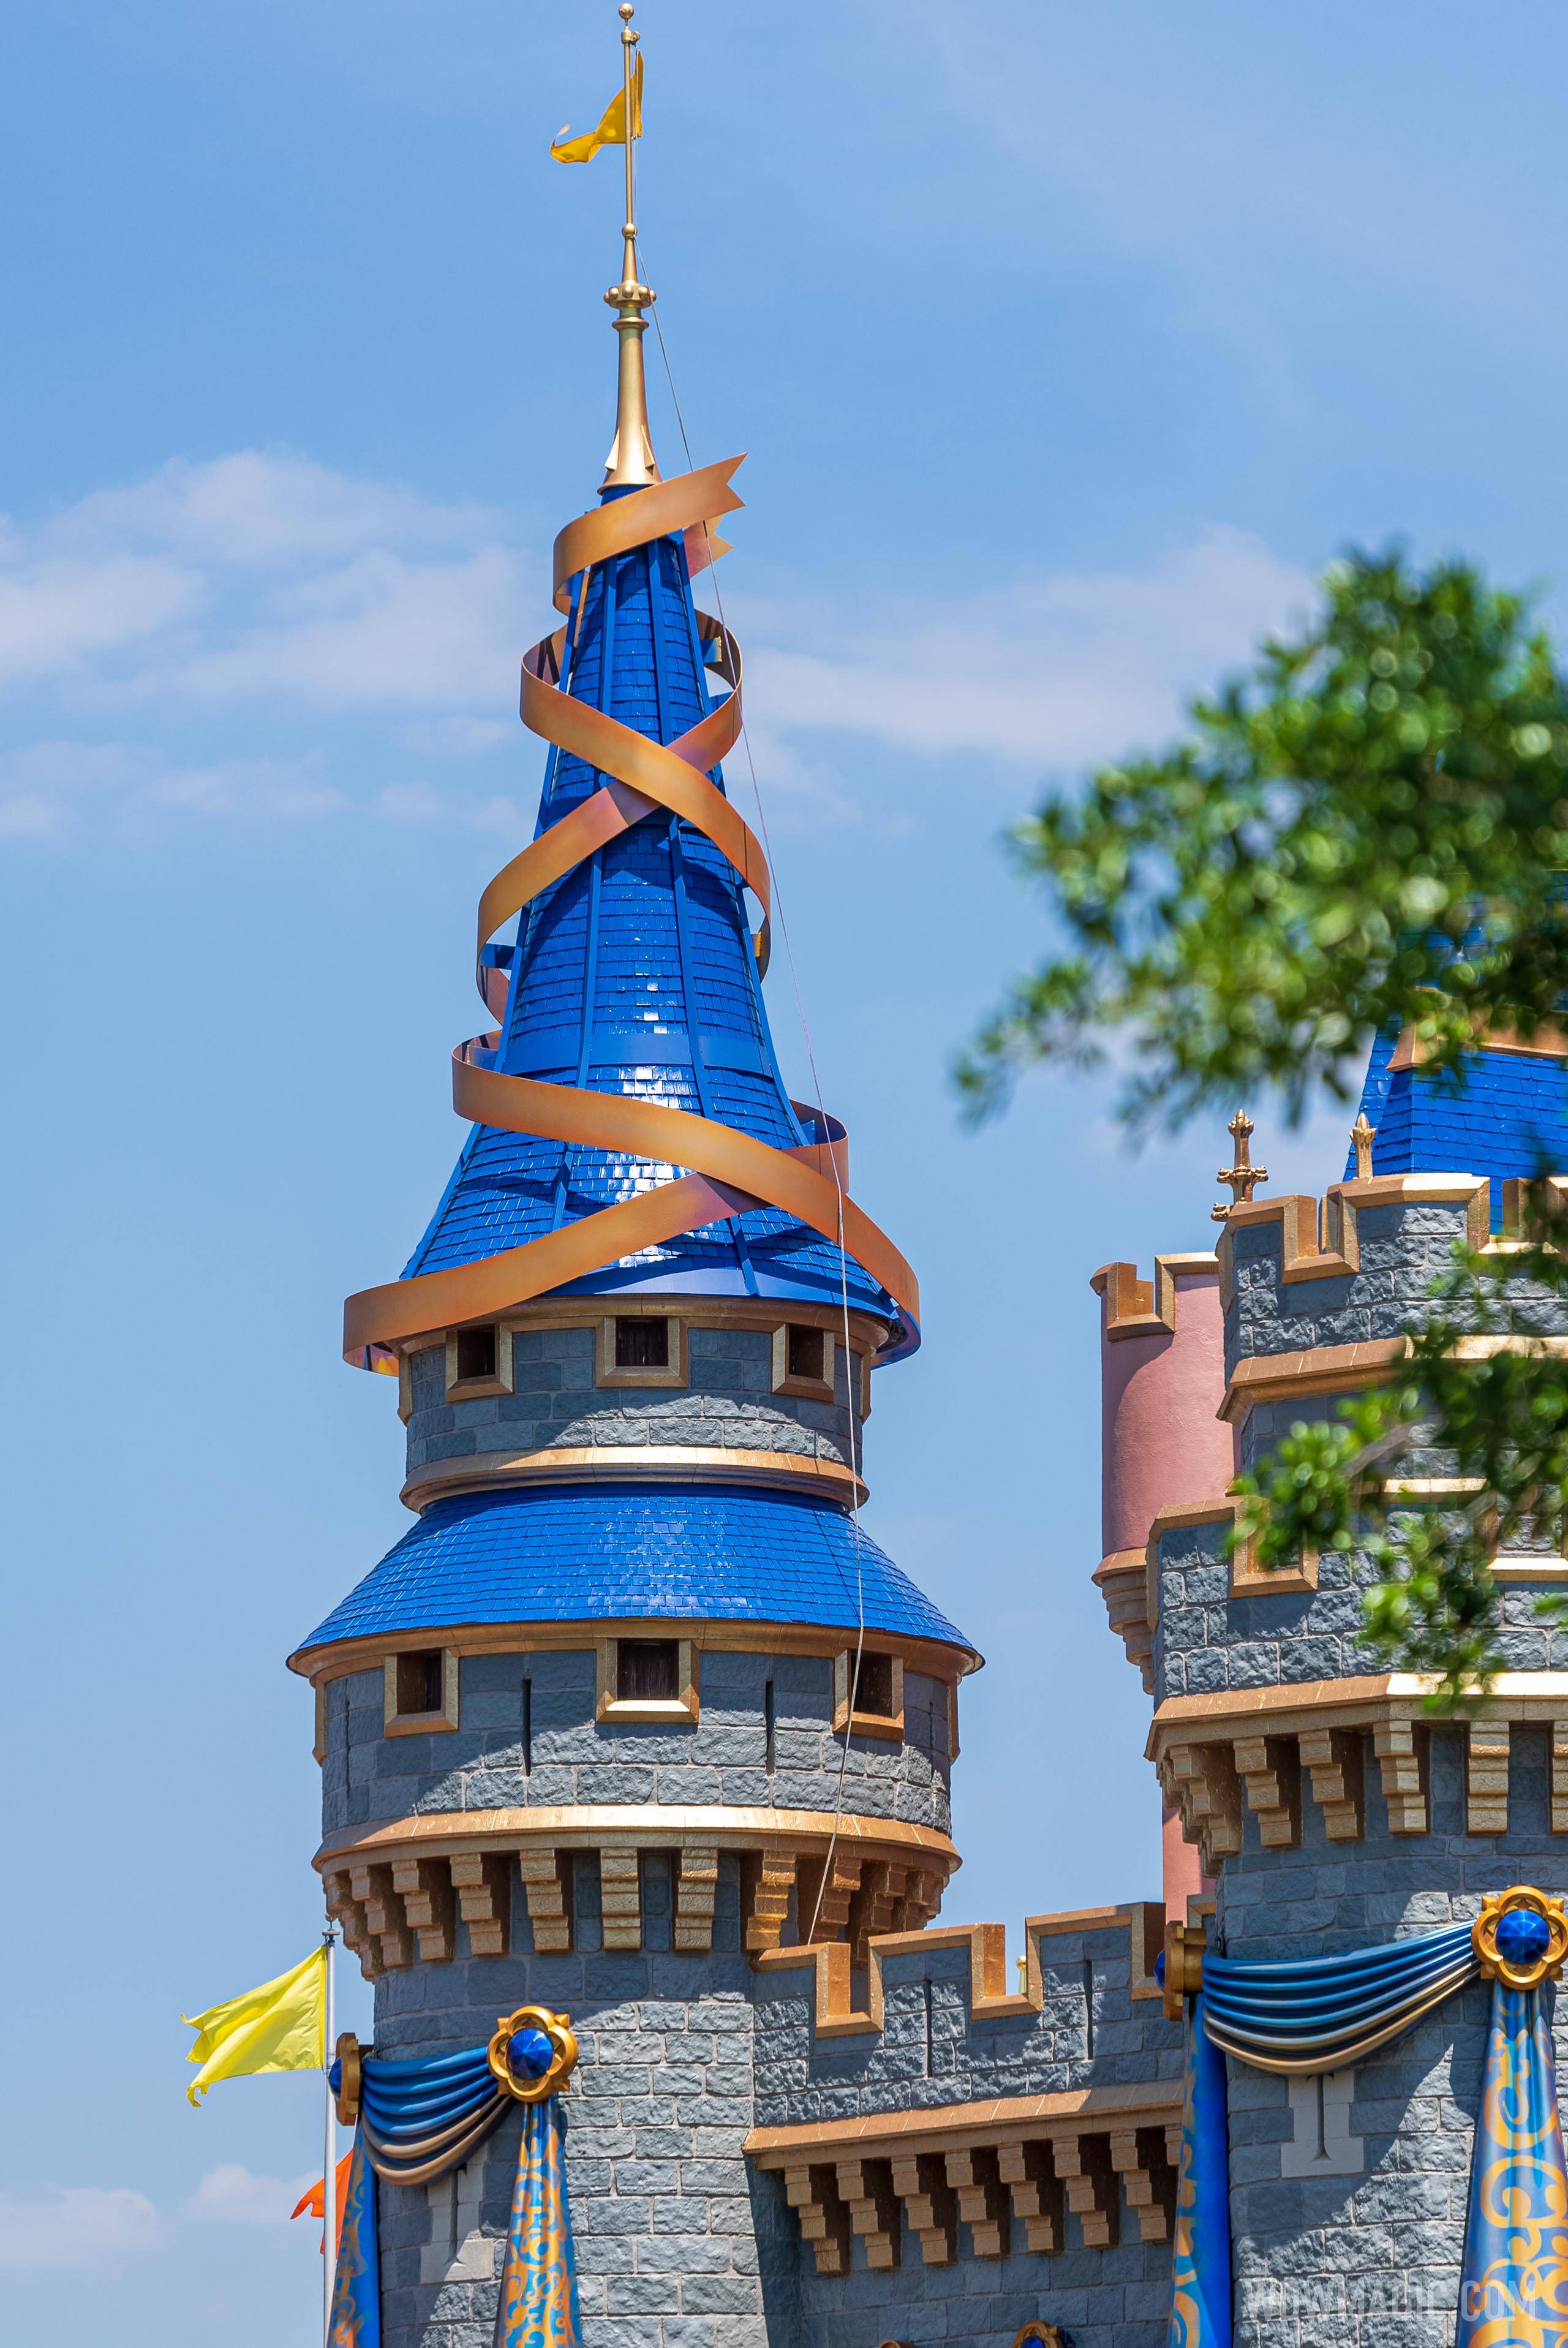 First ribbon installed on the spire of Cinderella Castle - April 7 2021